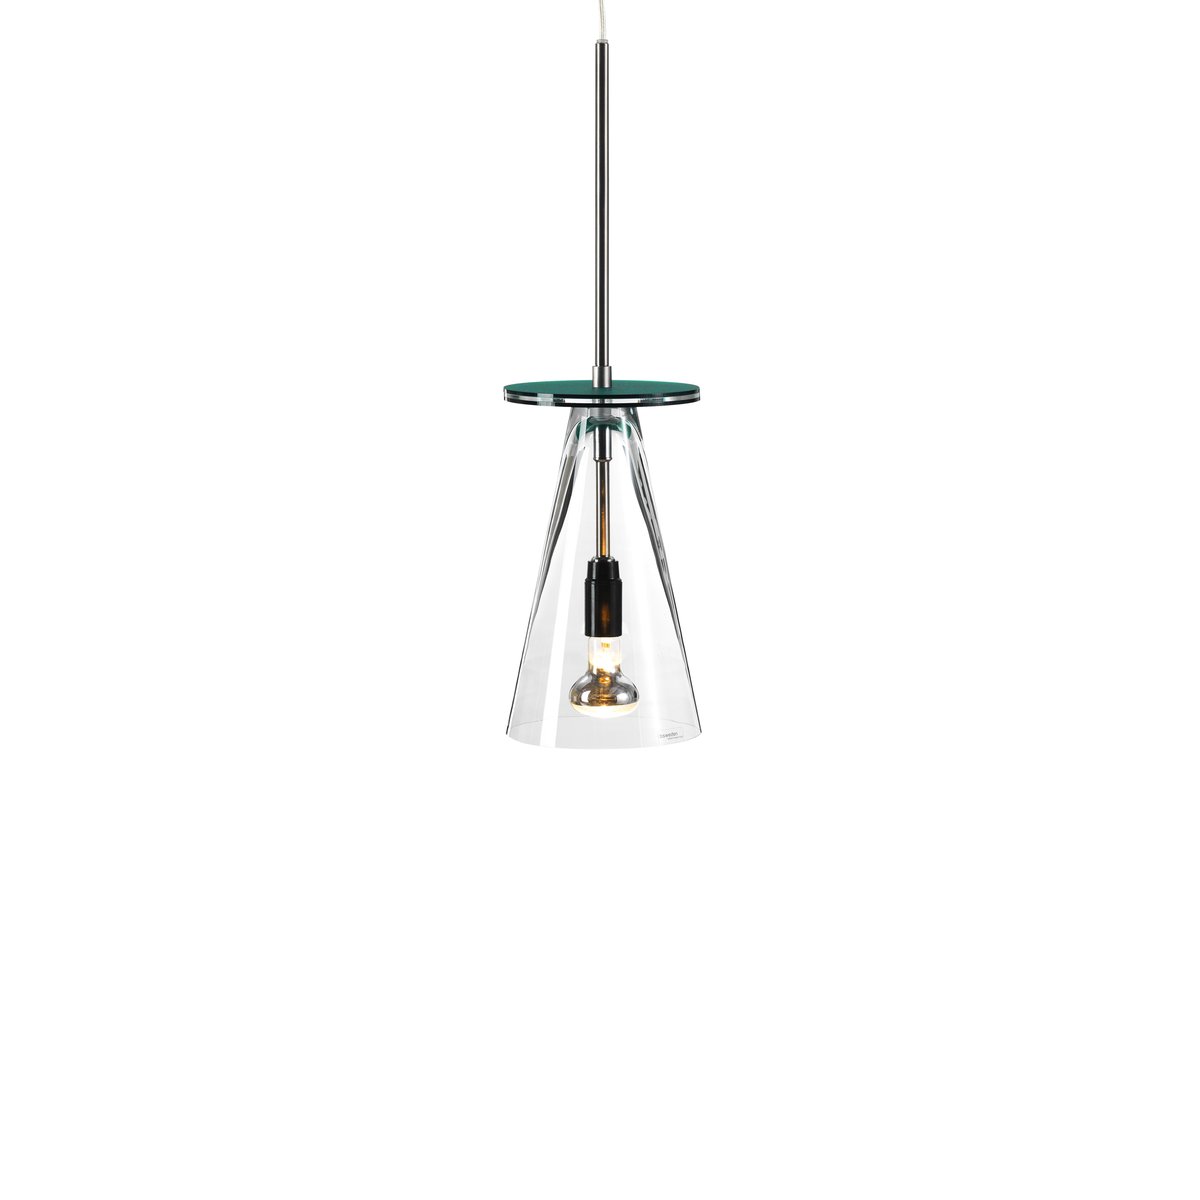 Bsweden Kon hanglamp transparant, turquoise schijf